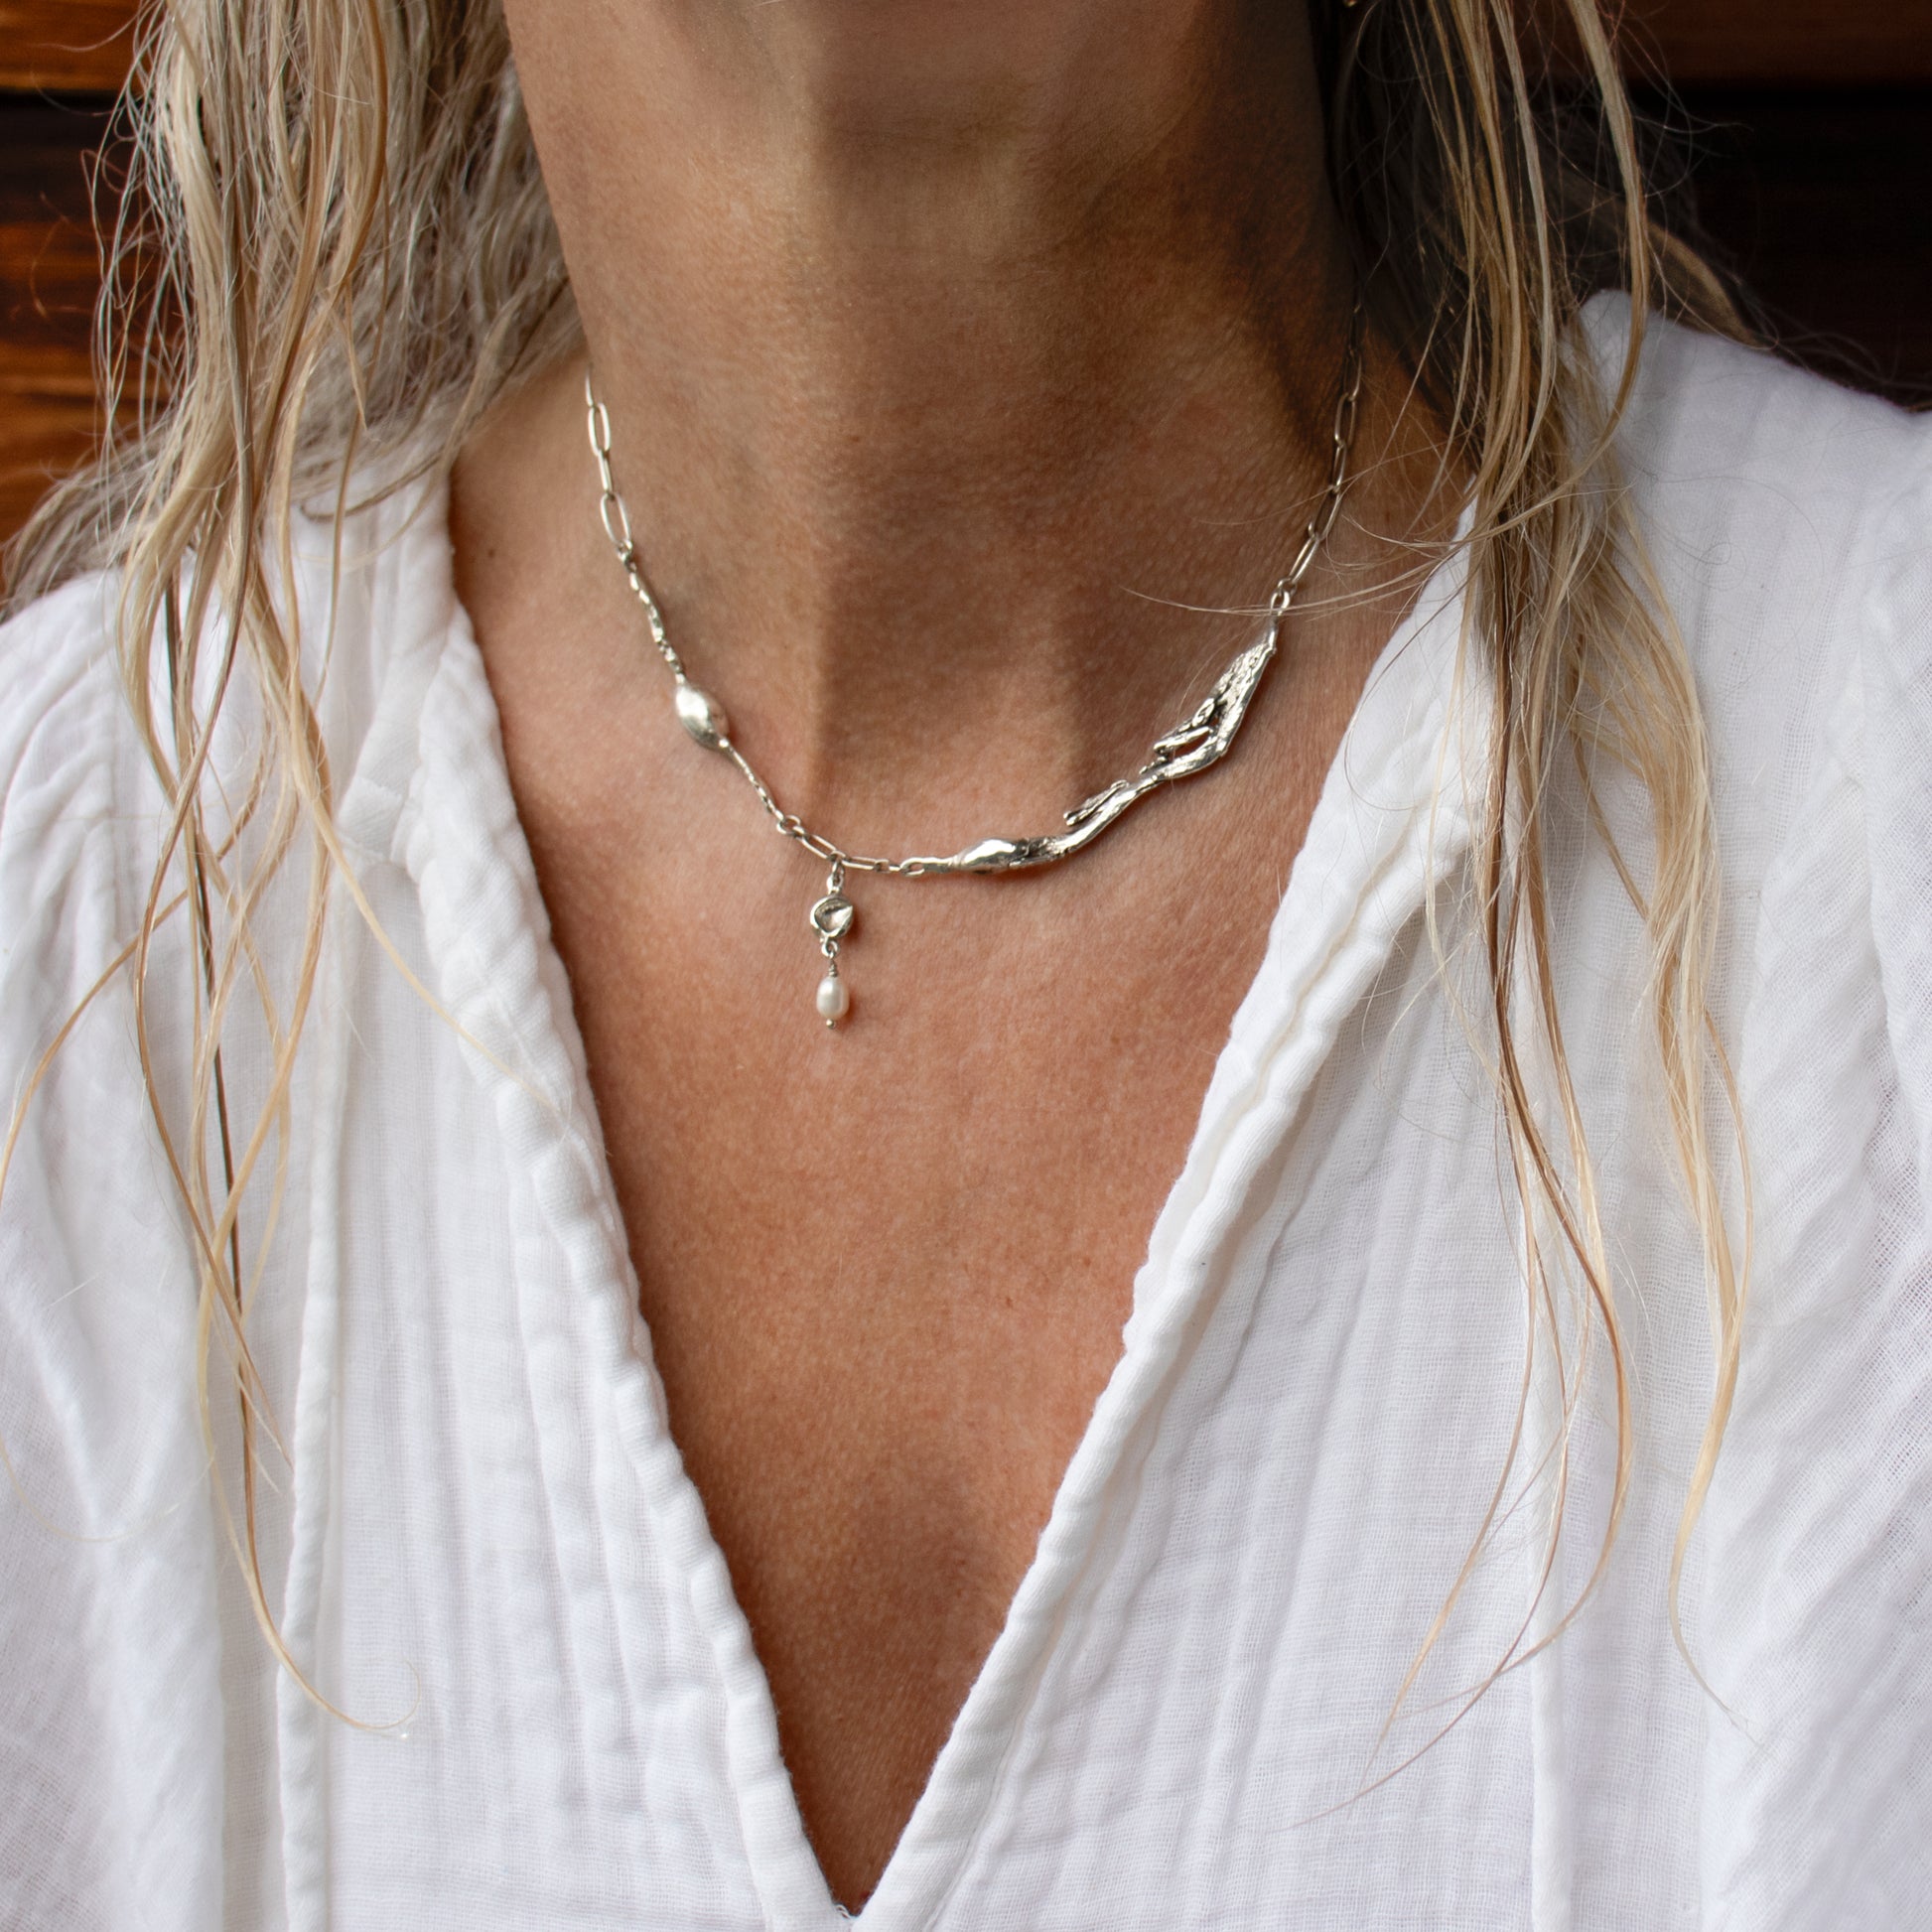 Reclaimed sterling silver seaweed feather and pods with 3 mm freshwater pearl on sterling paperclip chain adjustable 16-18 inches handmade and finished in our Catskills store-studio shown on model.